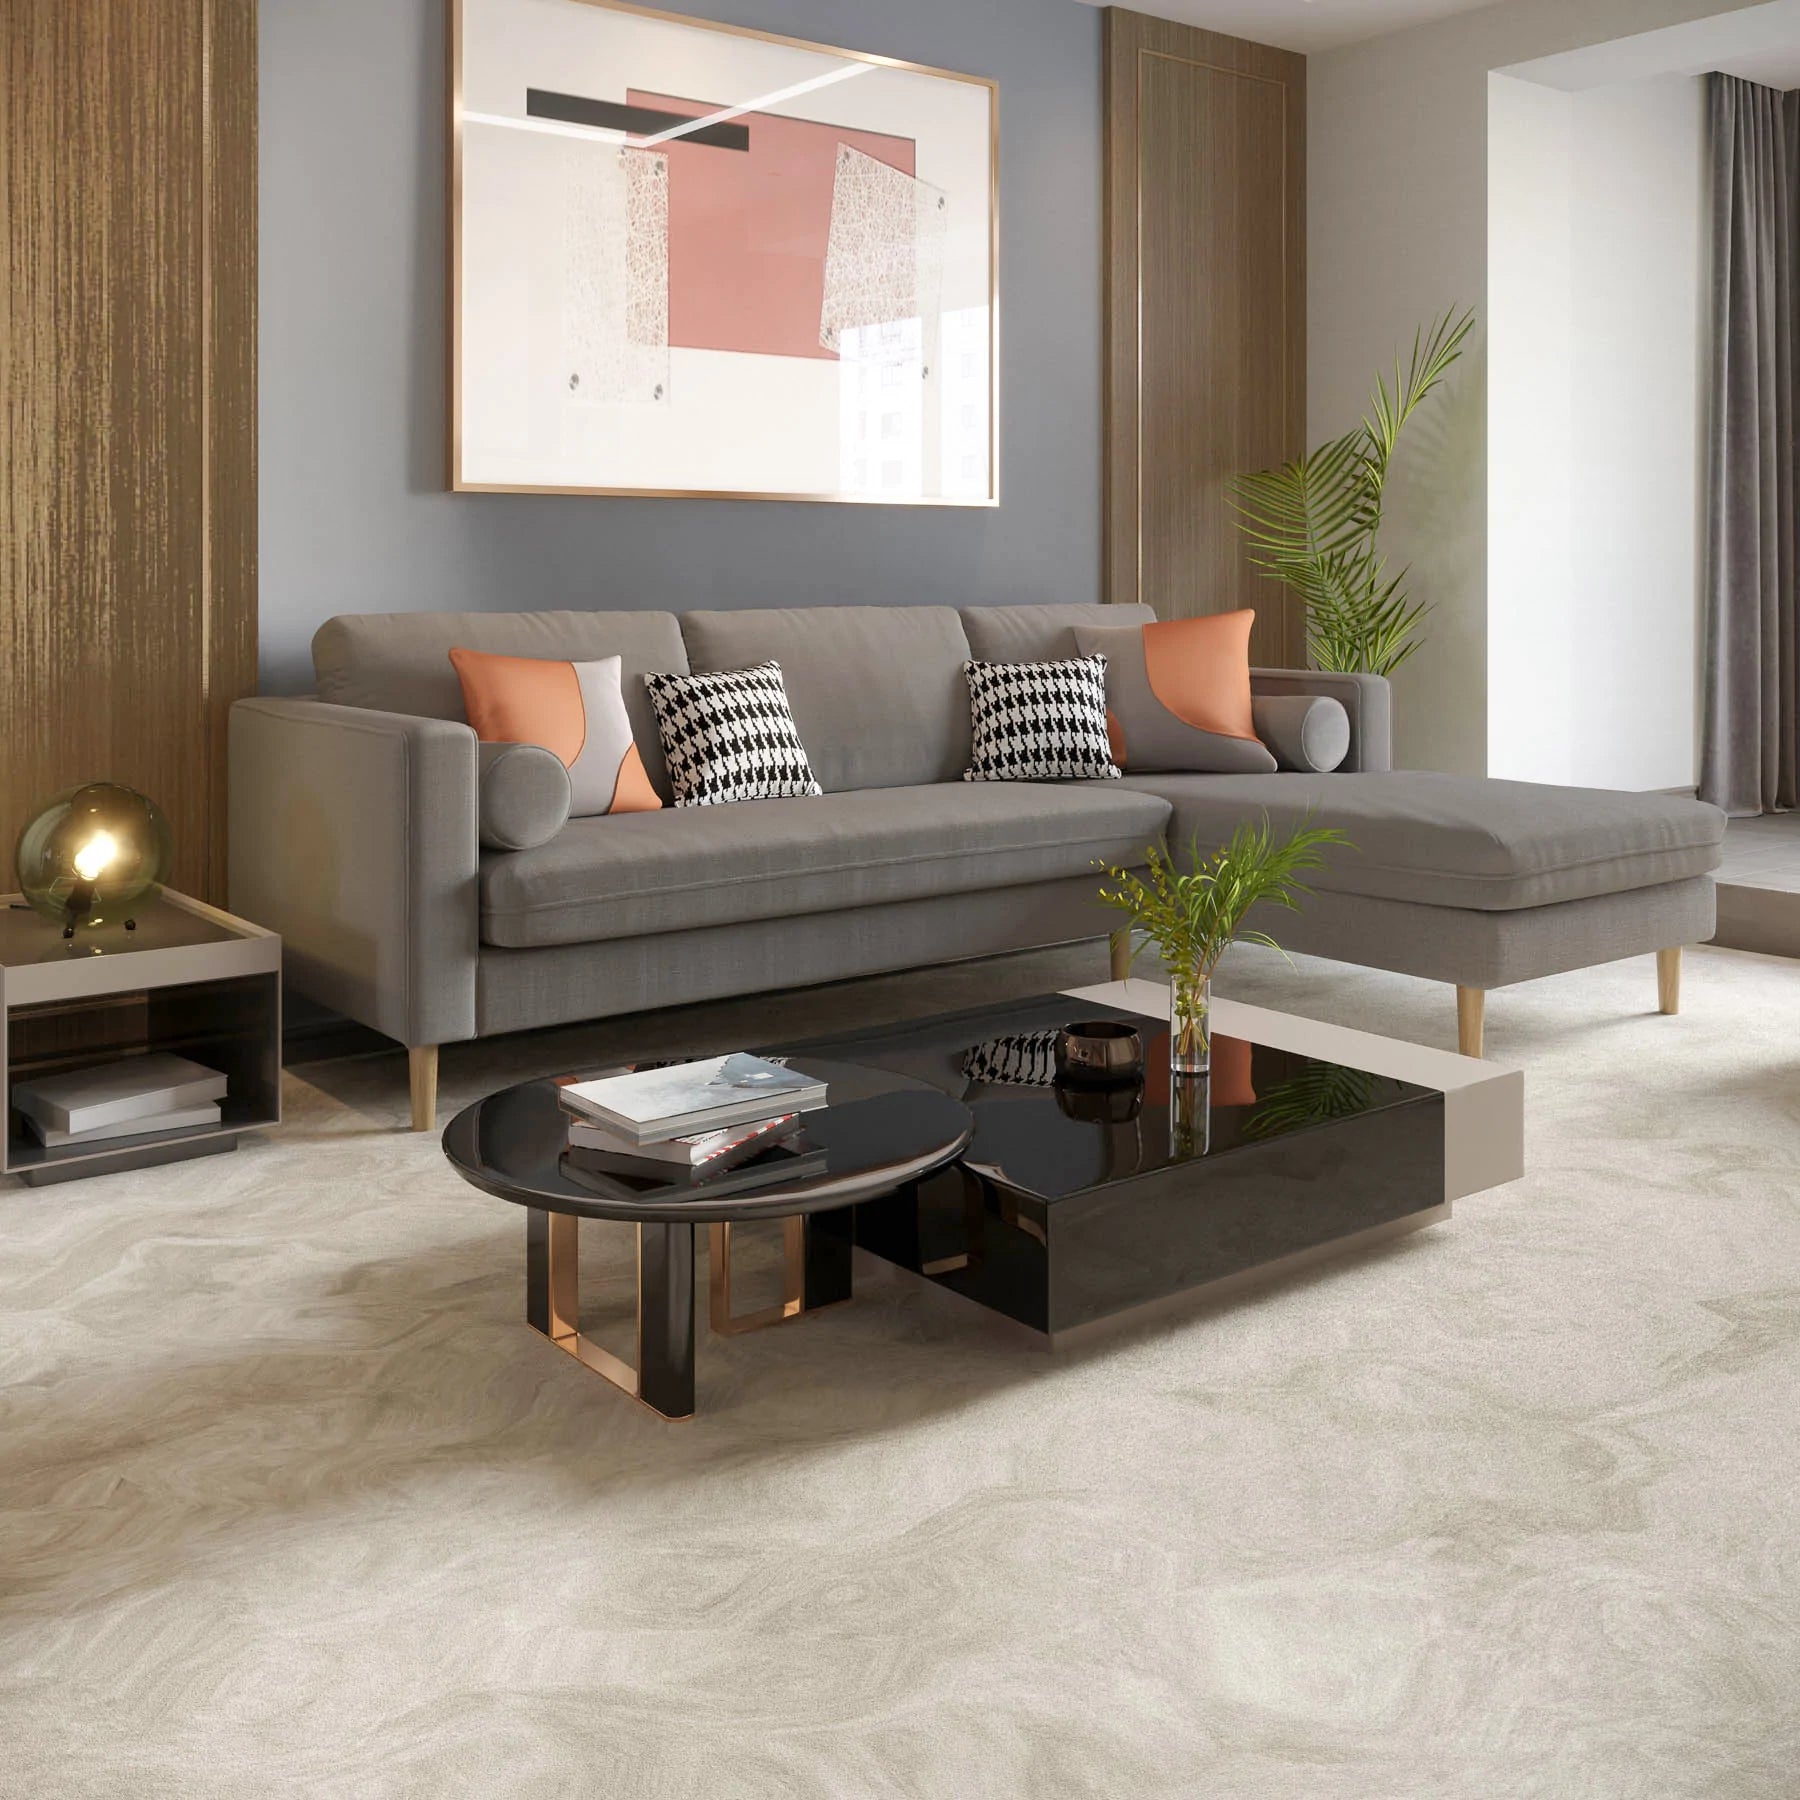 Easy Layouts on How to Arrange an L-Shaped Sofa in the Living Room!